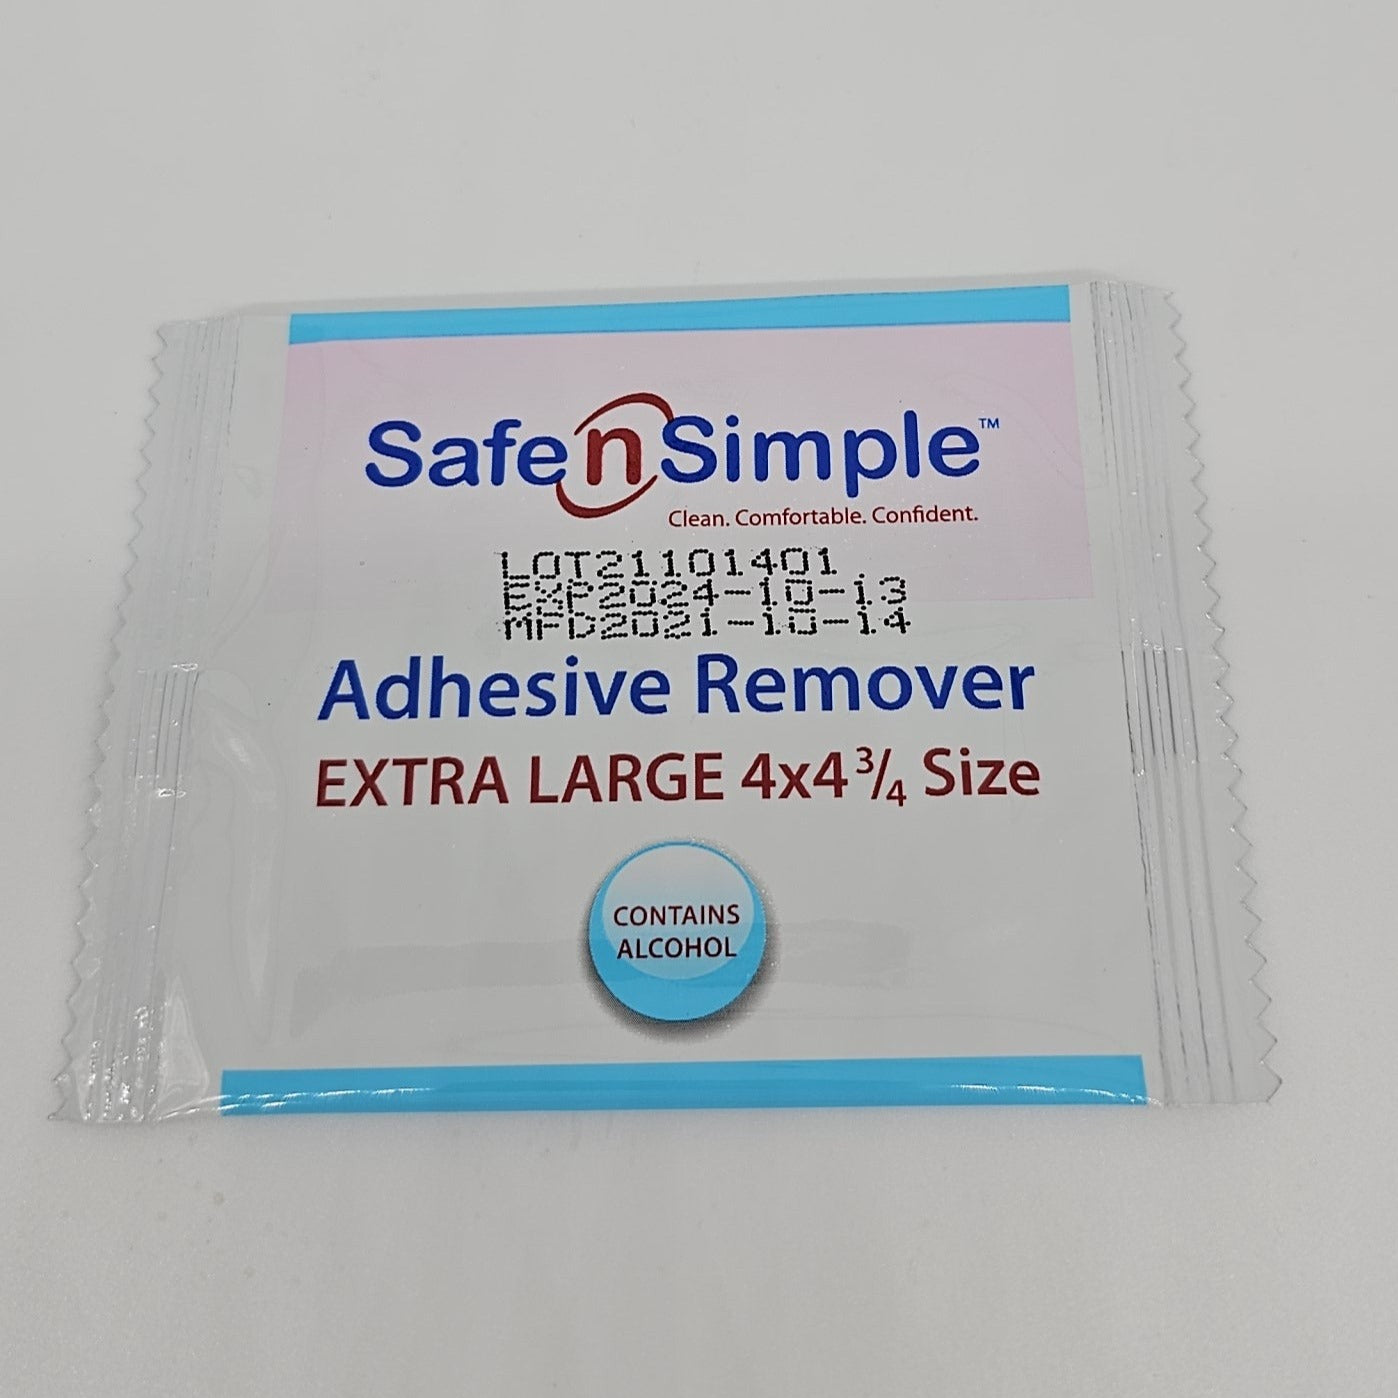 SNS Adhesive Remover, New medical products